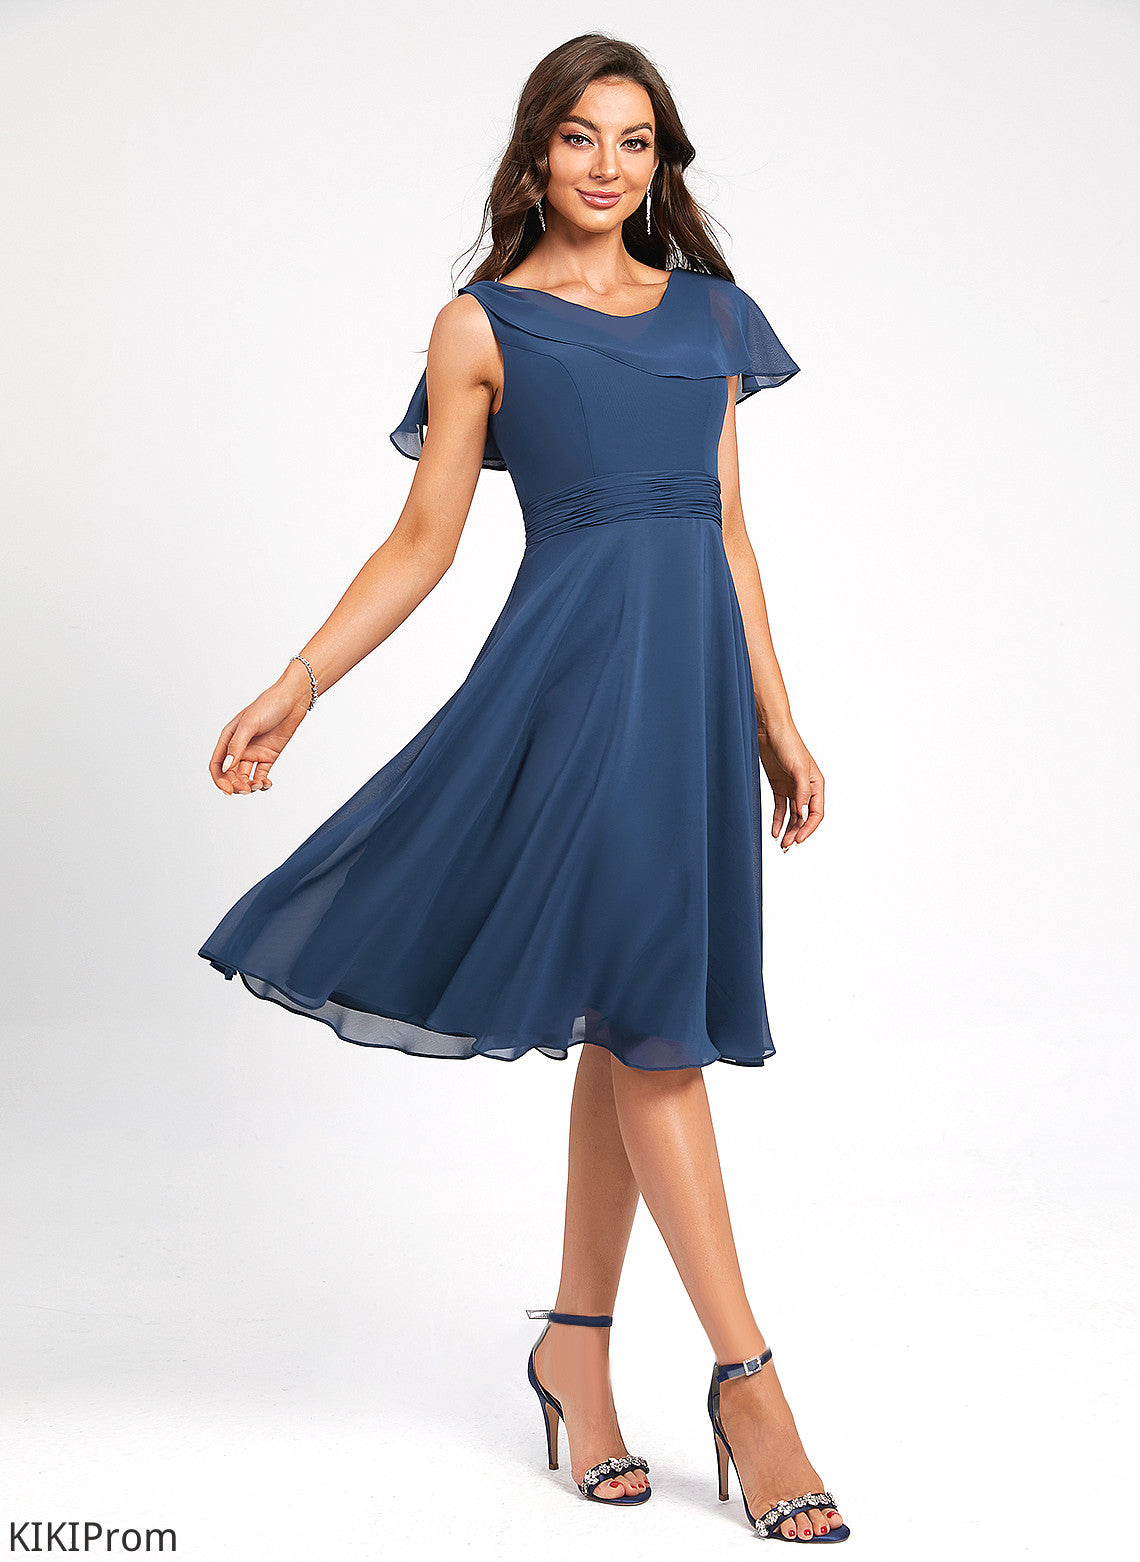 Scoop Dress Cocktail Dresses Knee-Length Setlla Pleated With Ruffle Chiffon Cocktail Neck A-Line